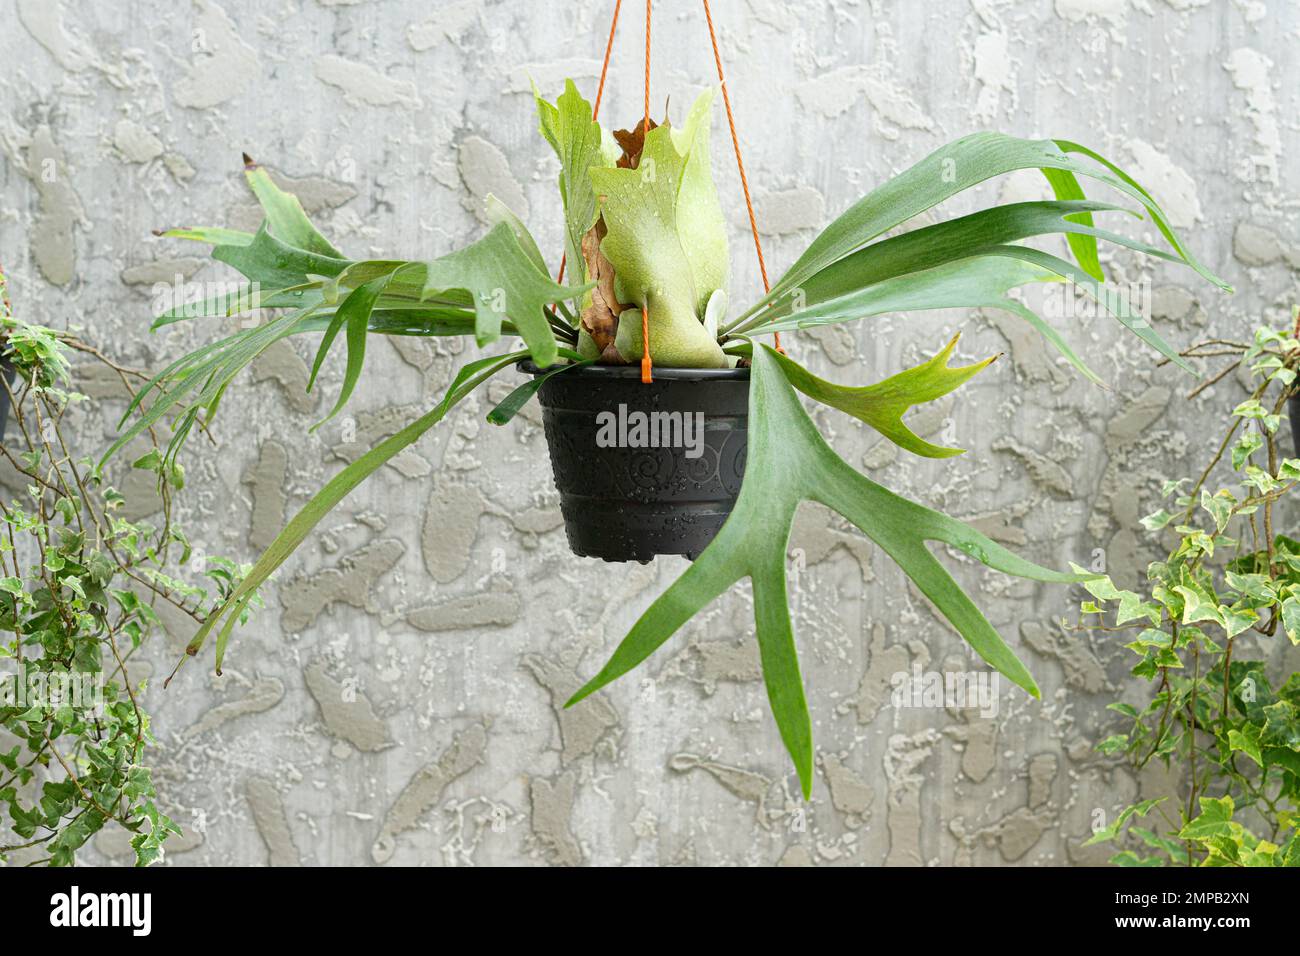 Elkhorn fern on hanging pot with gray concrete background Stock Photo